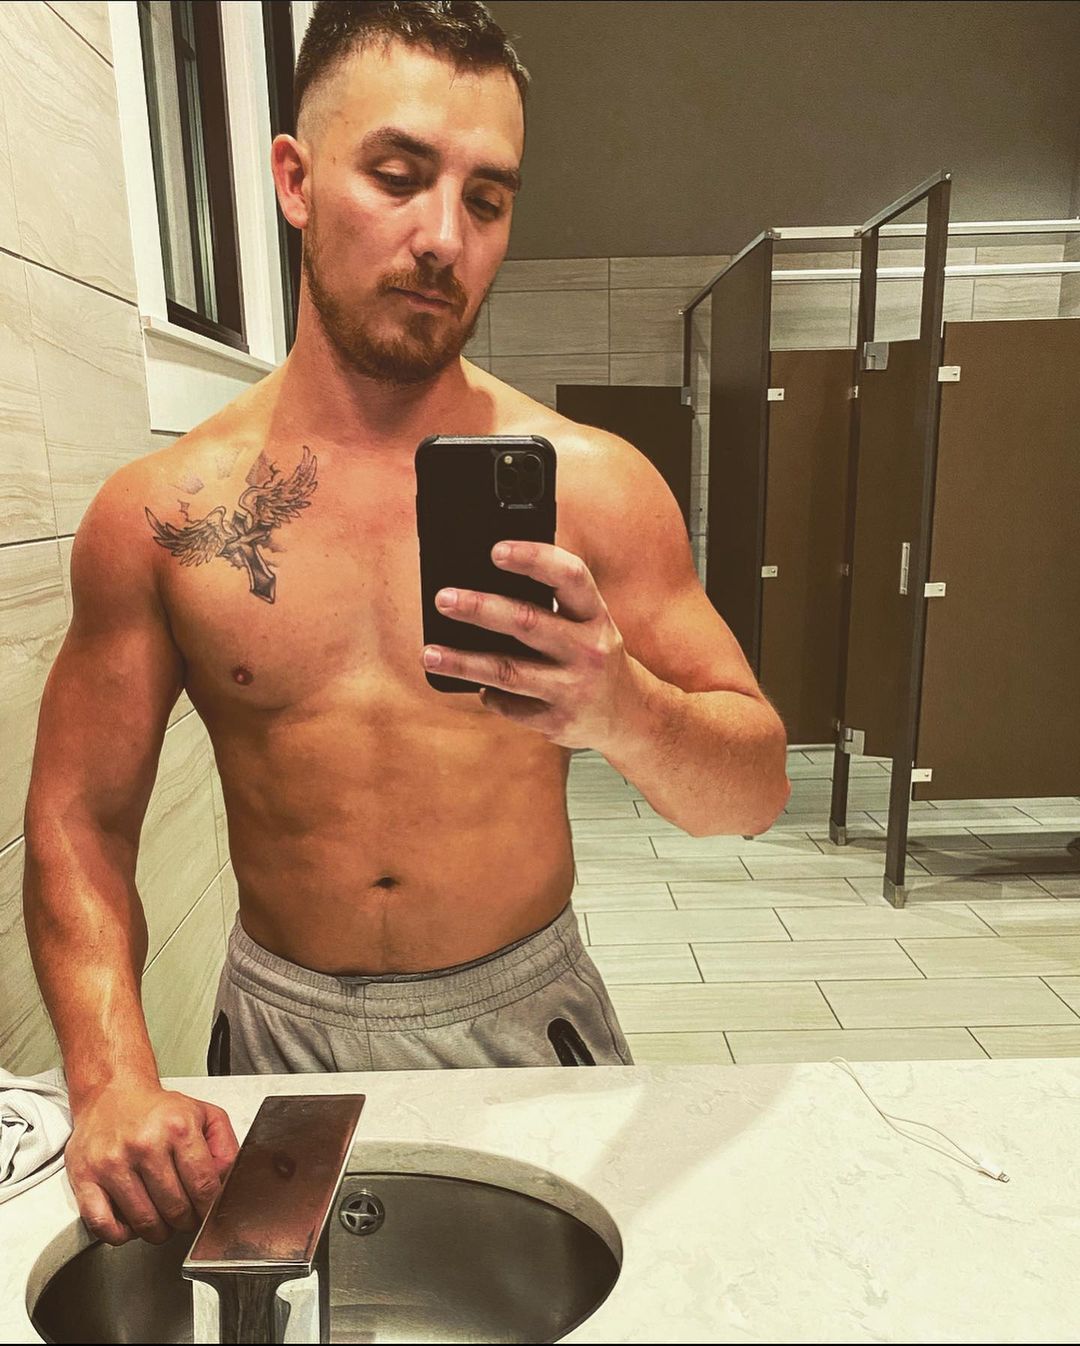 Fans were quick to call out Josh for choosing bodybuilding over his children